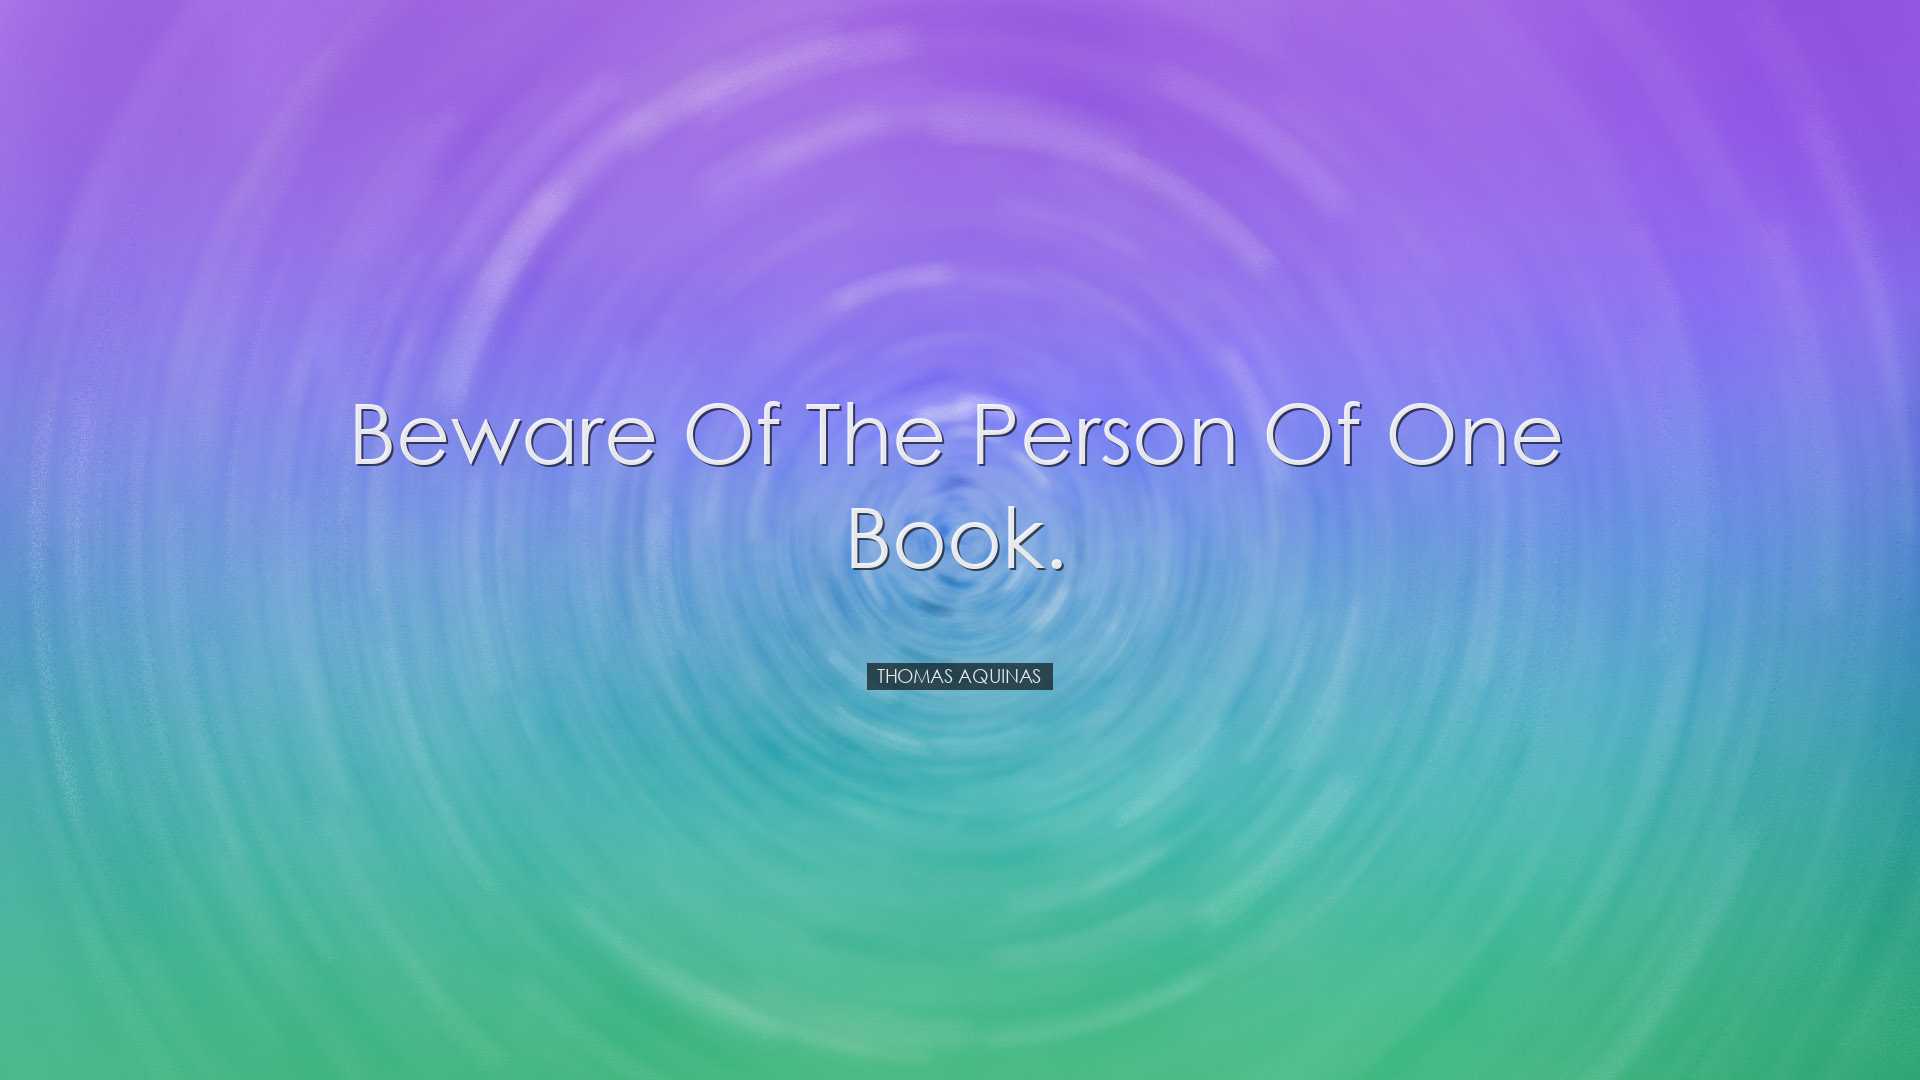 Beware of the person of one book. - Thomas Aquinas